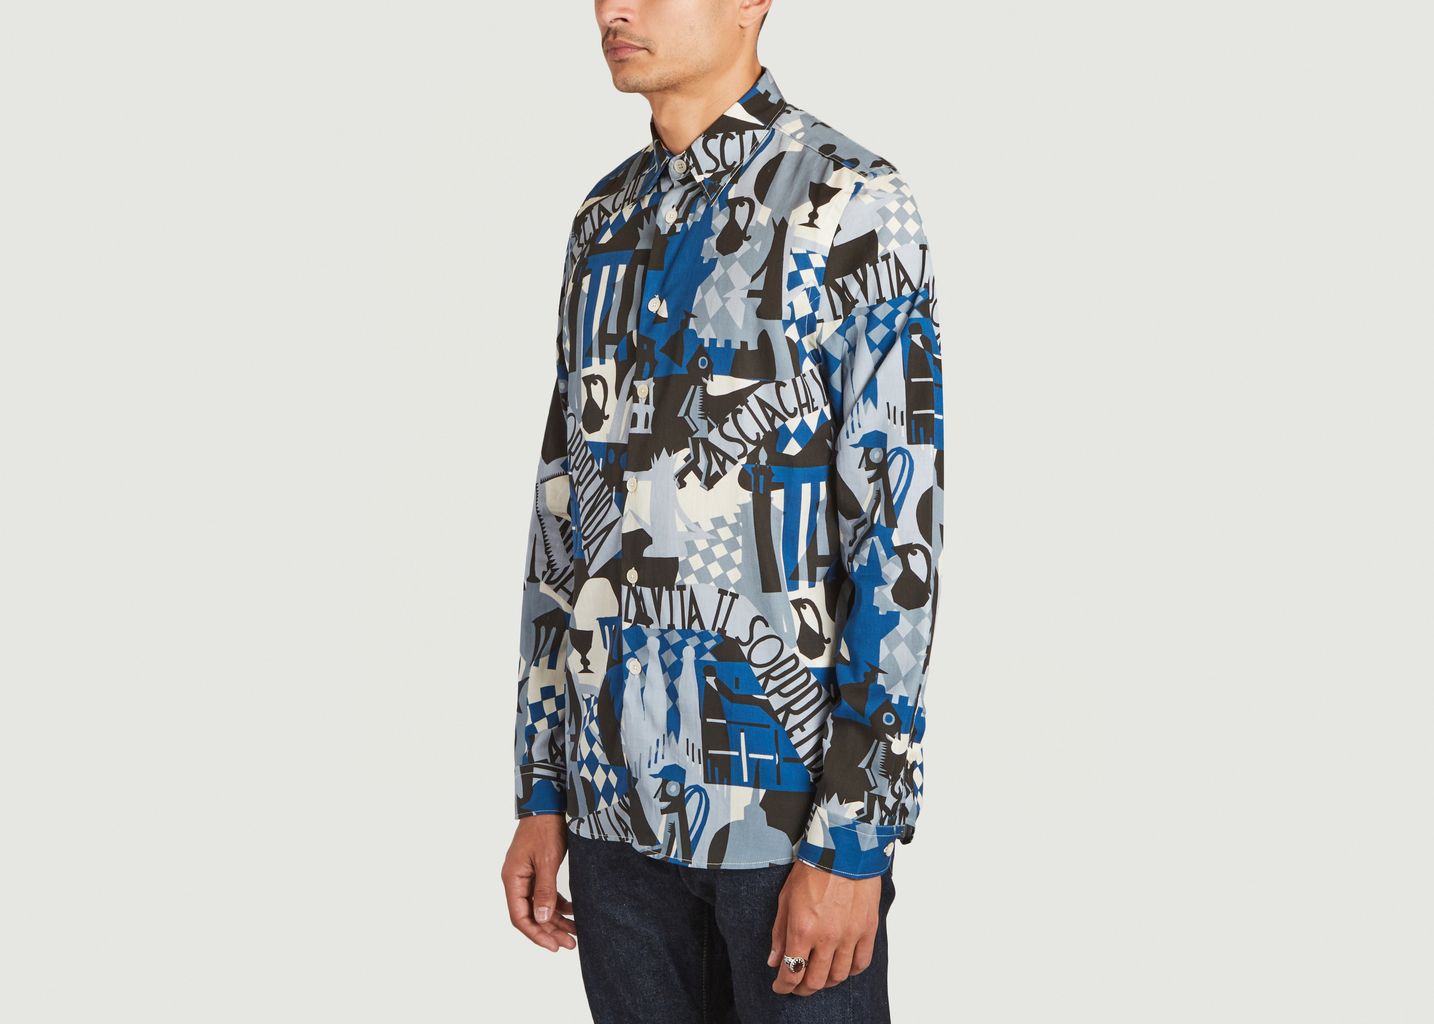 Regular Fit Shirt - PS by PAUL SMITH